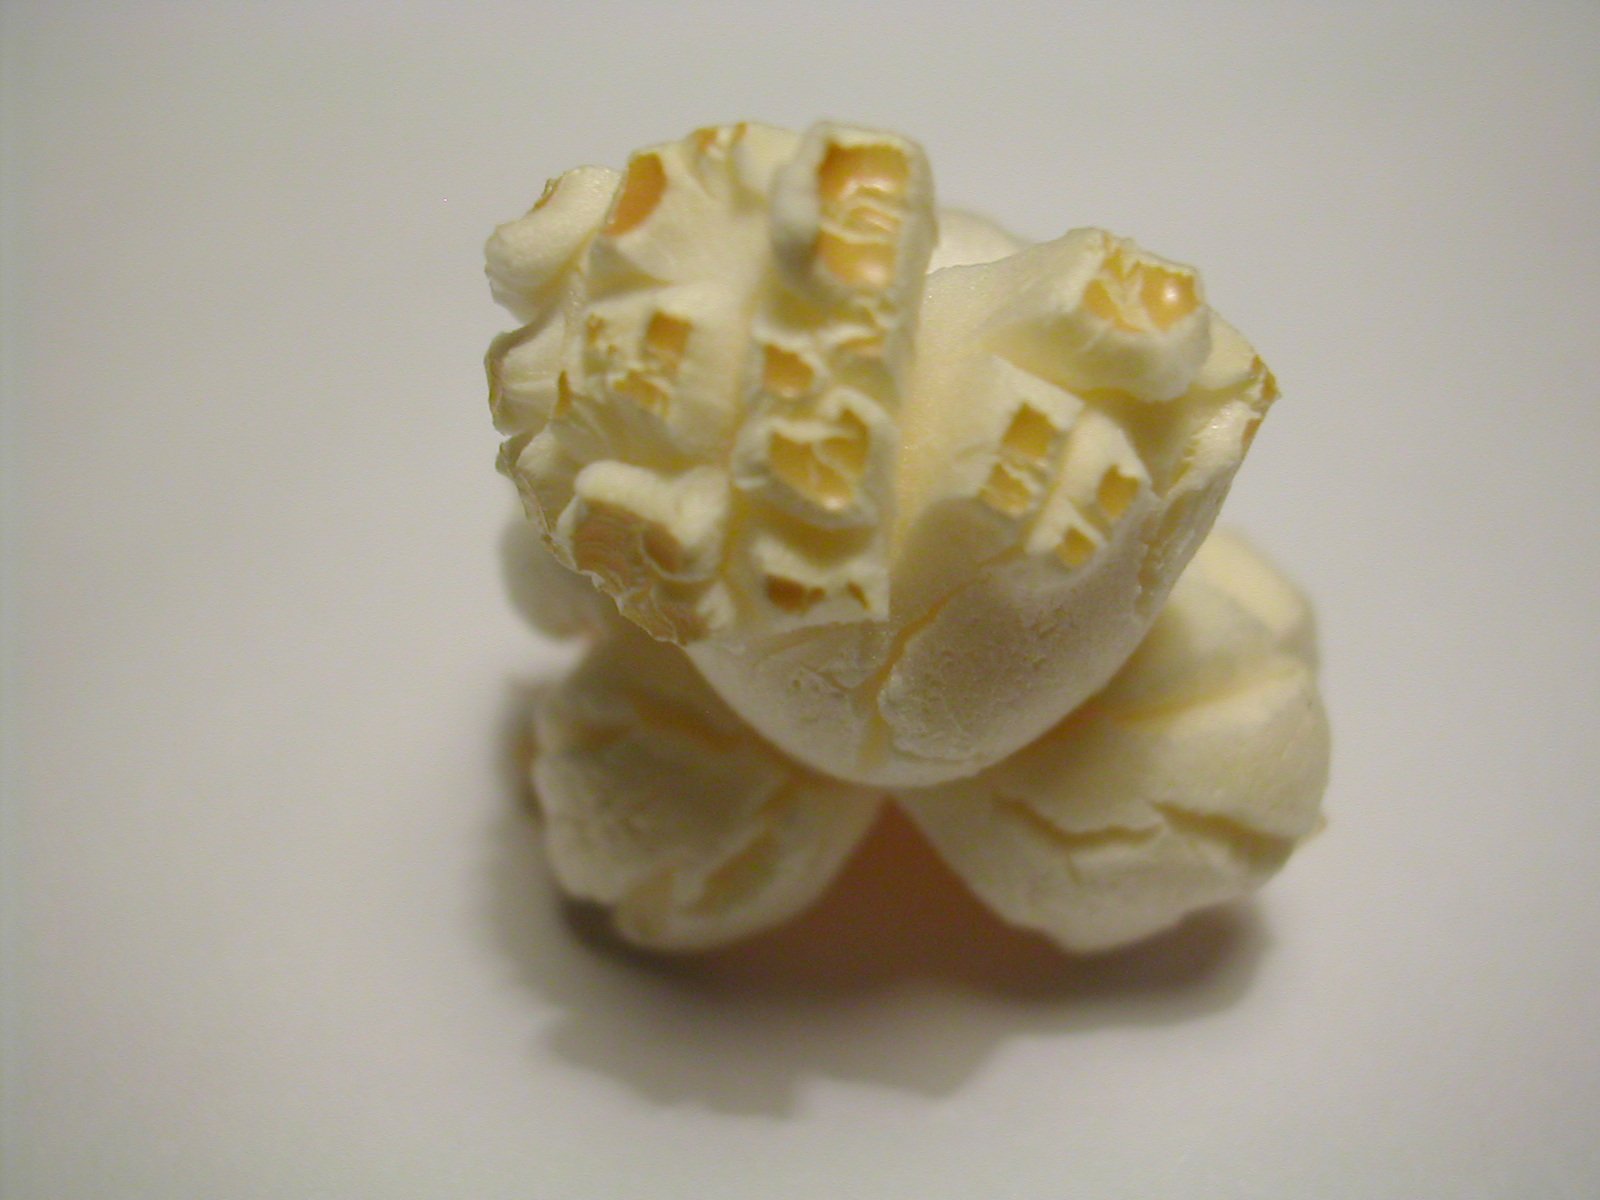 two candy pieces of white cream are shown